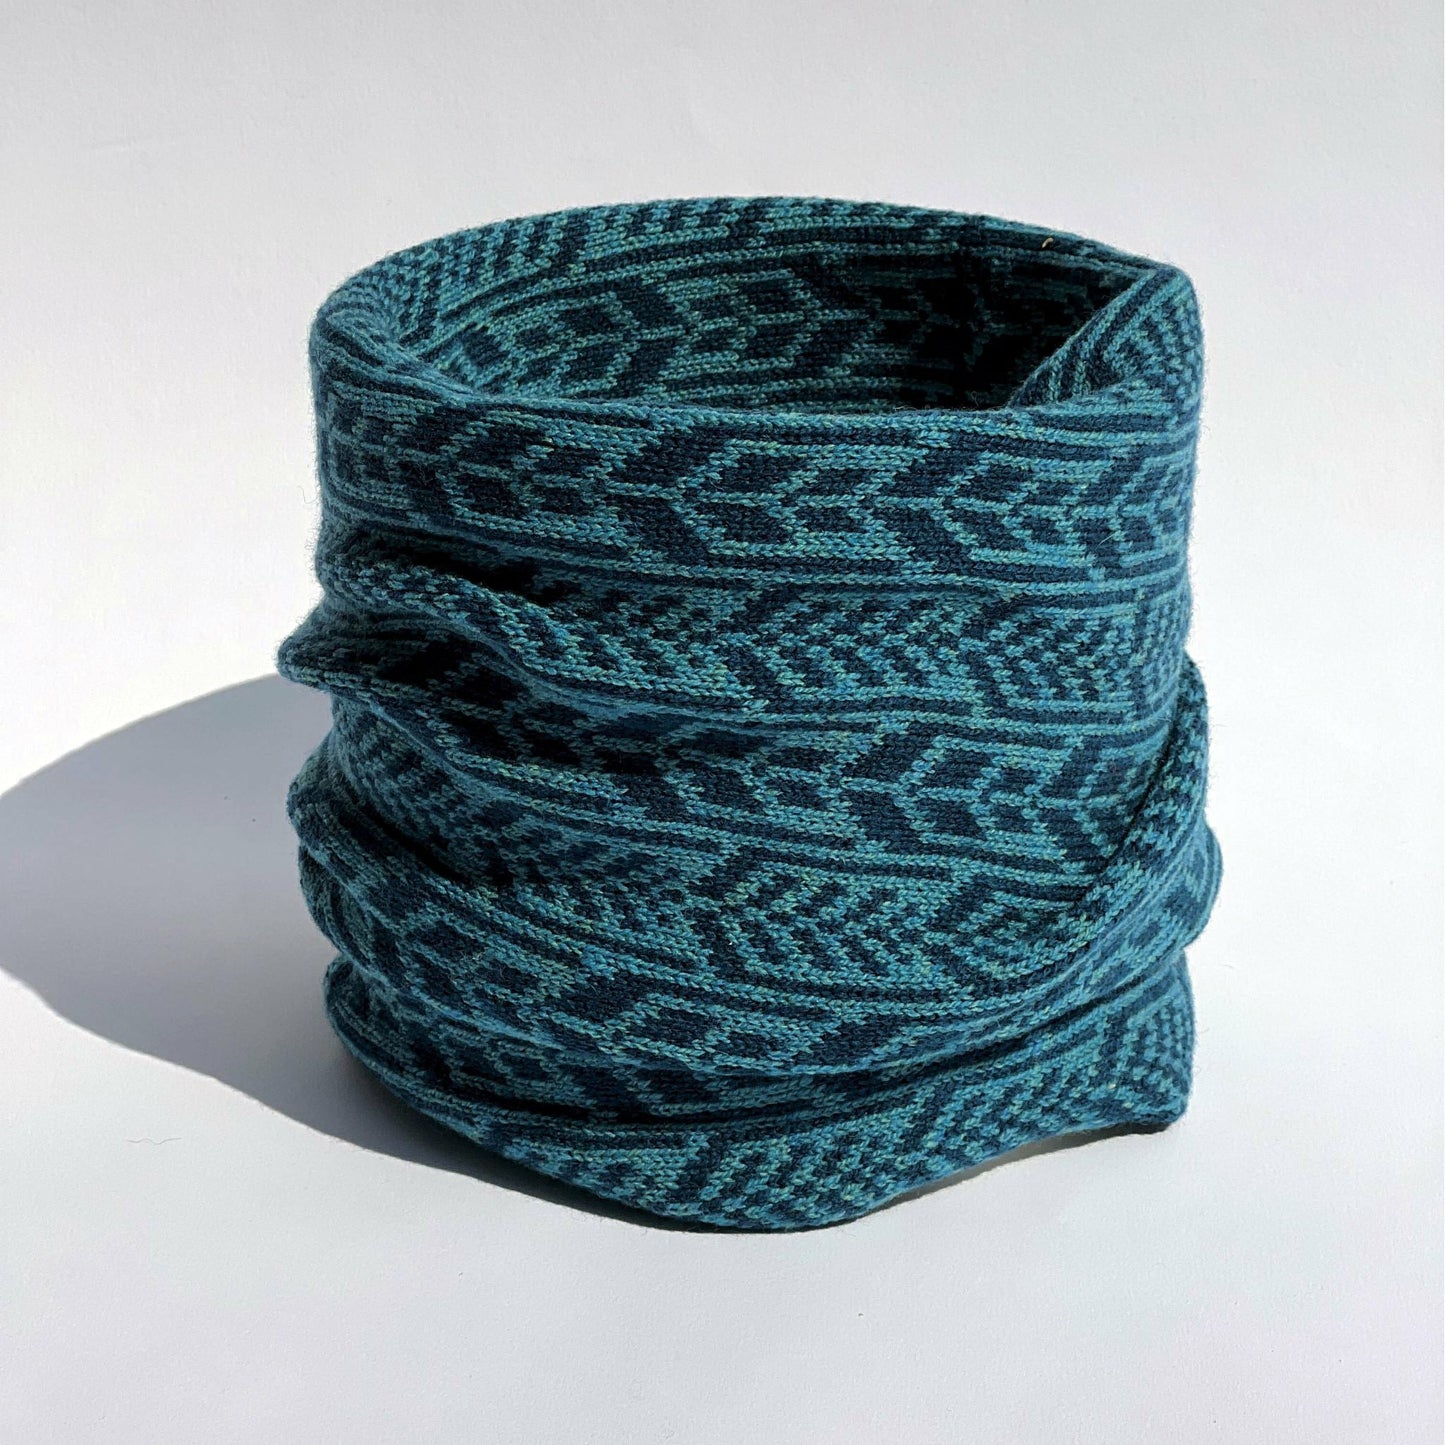 Our scarves and neck warmers are all knitted using a punch-card system on a manual vintage knitting machine and made from pure Merino lamb's wool, with bespoke two-colour fair isle patterns unique to Hebridean Journey. This colour is Ocean.